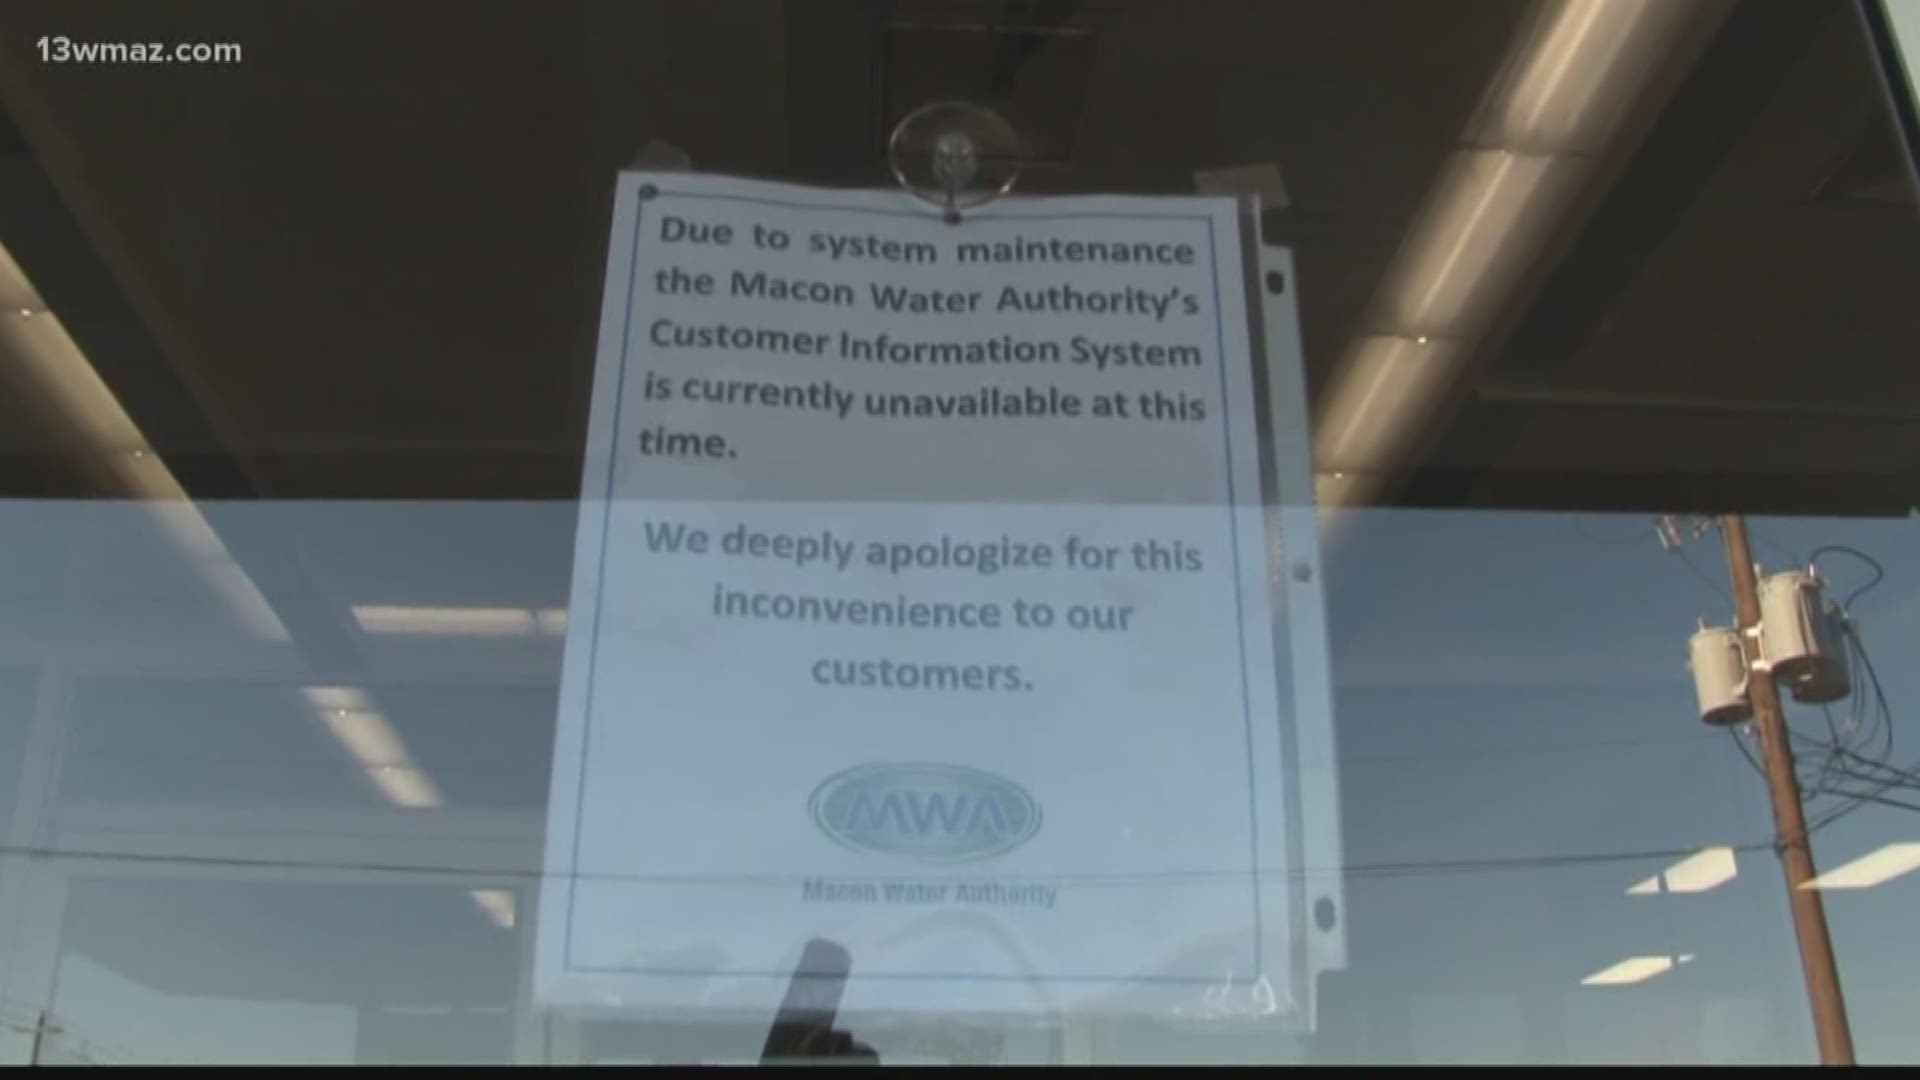 If you're a Macon Water Authority customer, you've probably had trouble paying your bill online. MWA was hit by a ransomware attack.